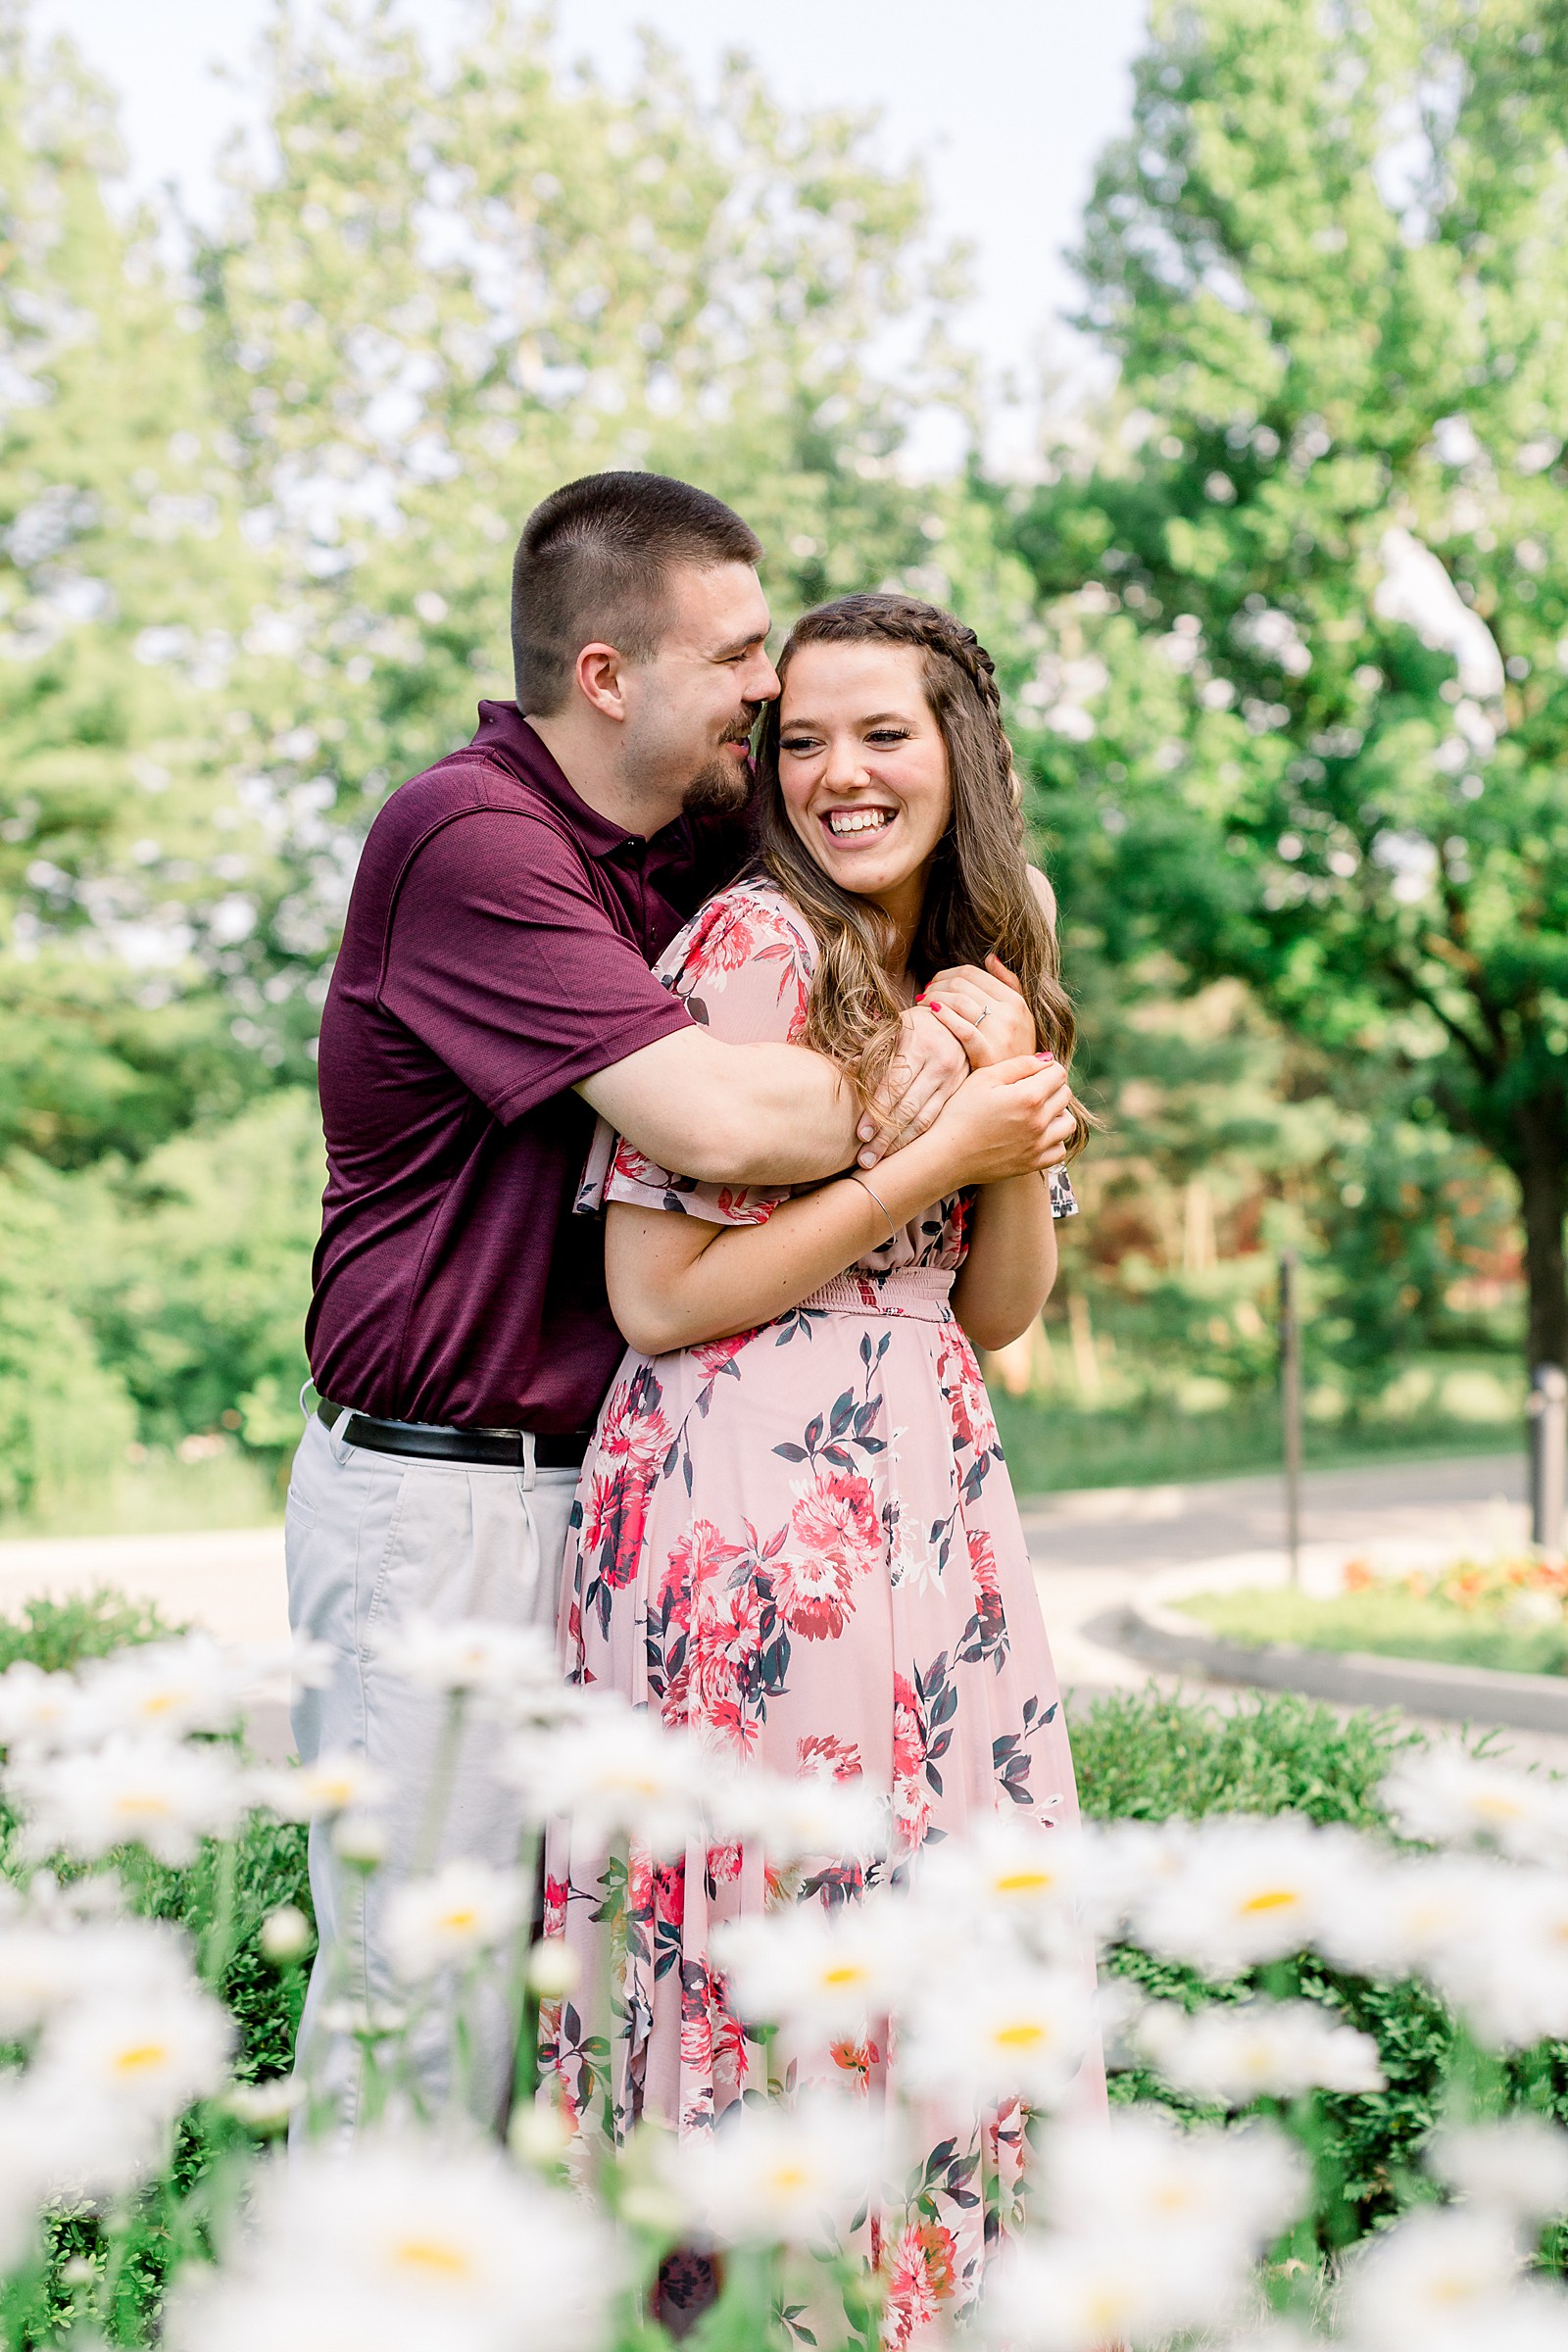 Engagement photos at Coxhall Gardens in Carmel, Indiana